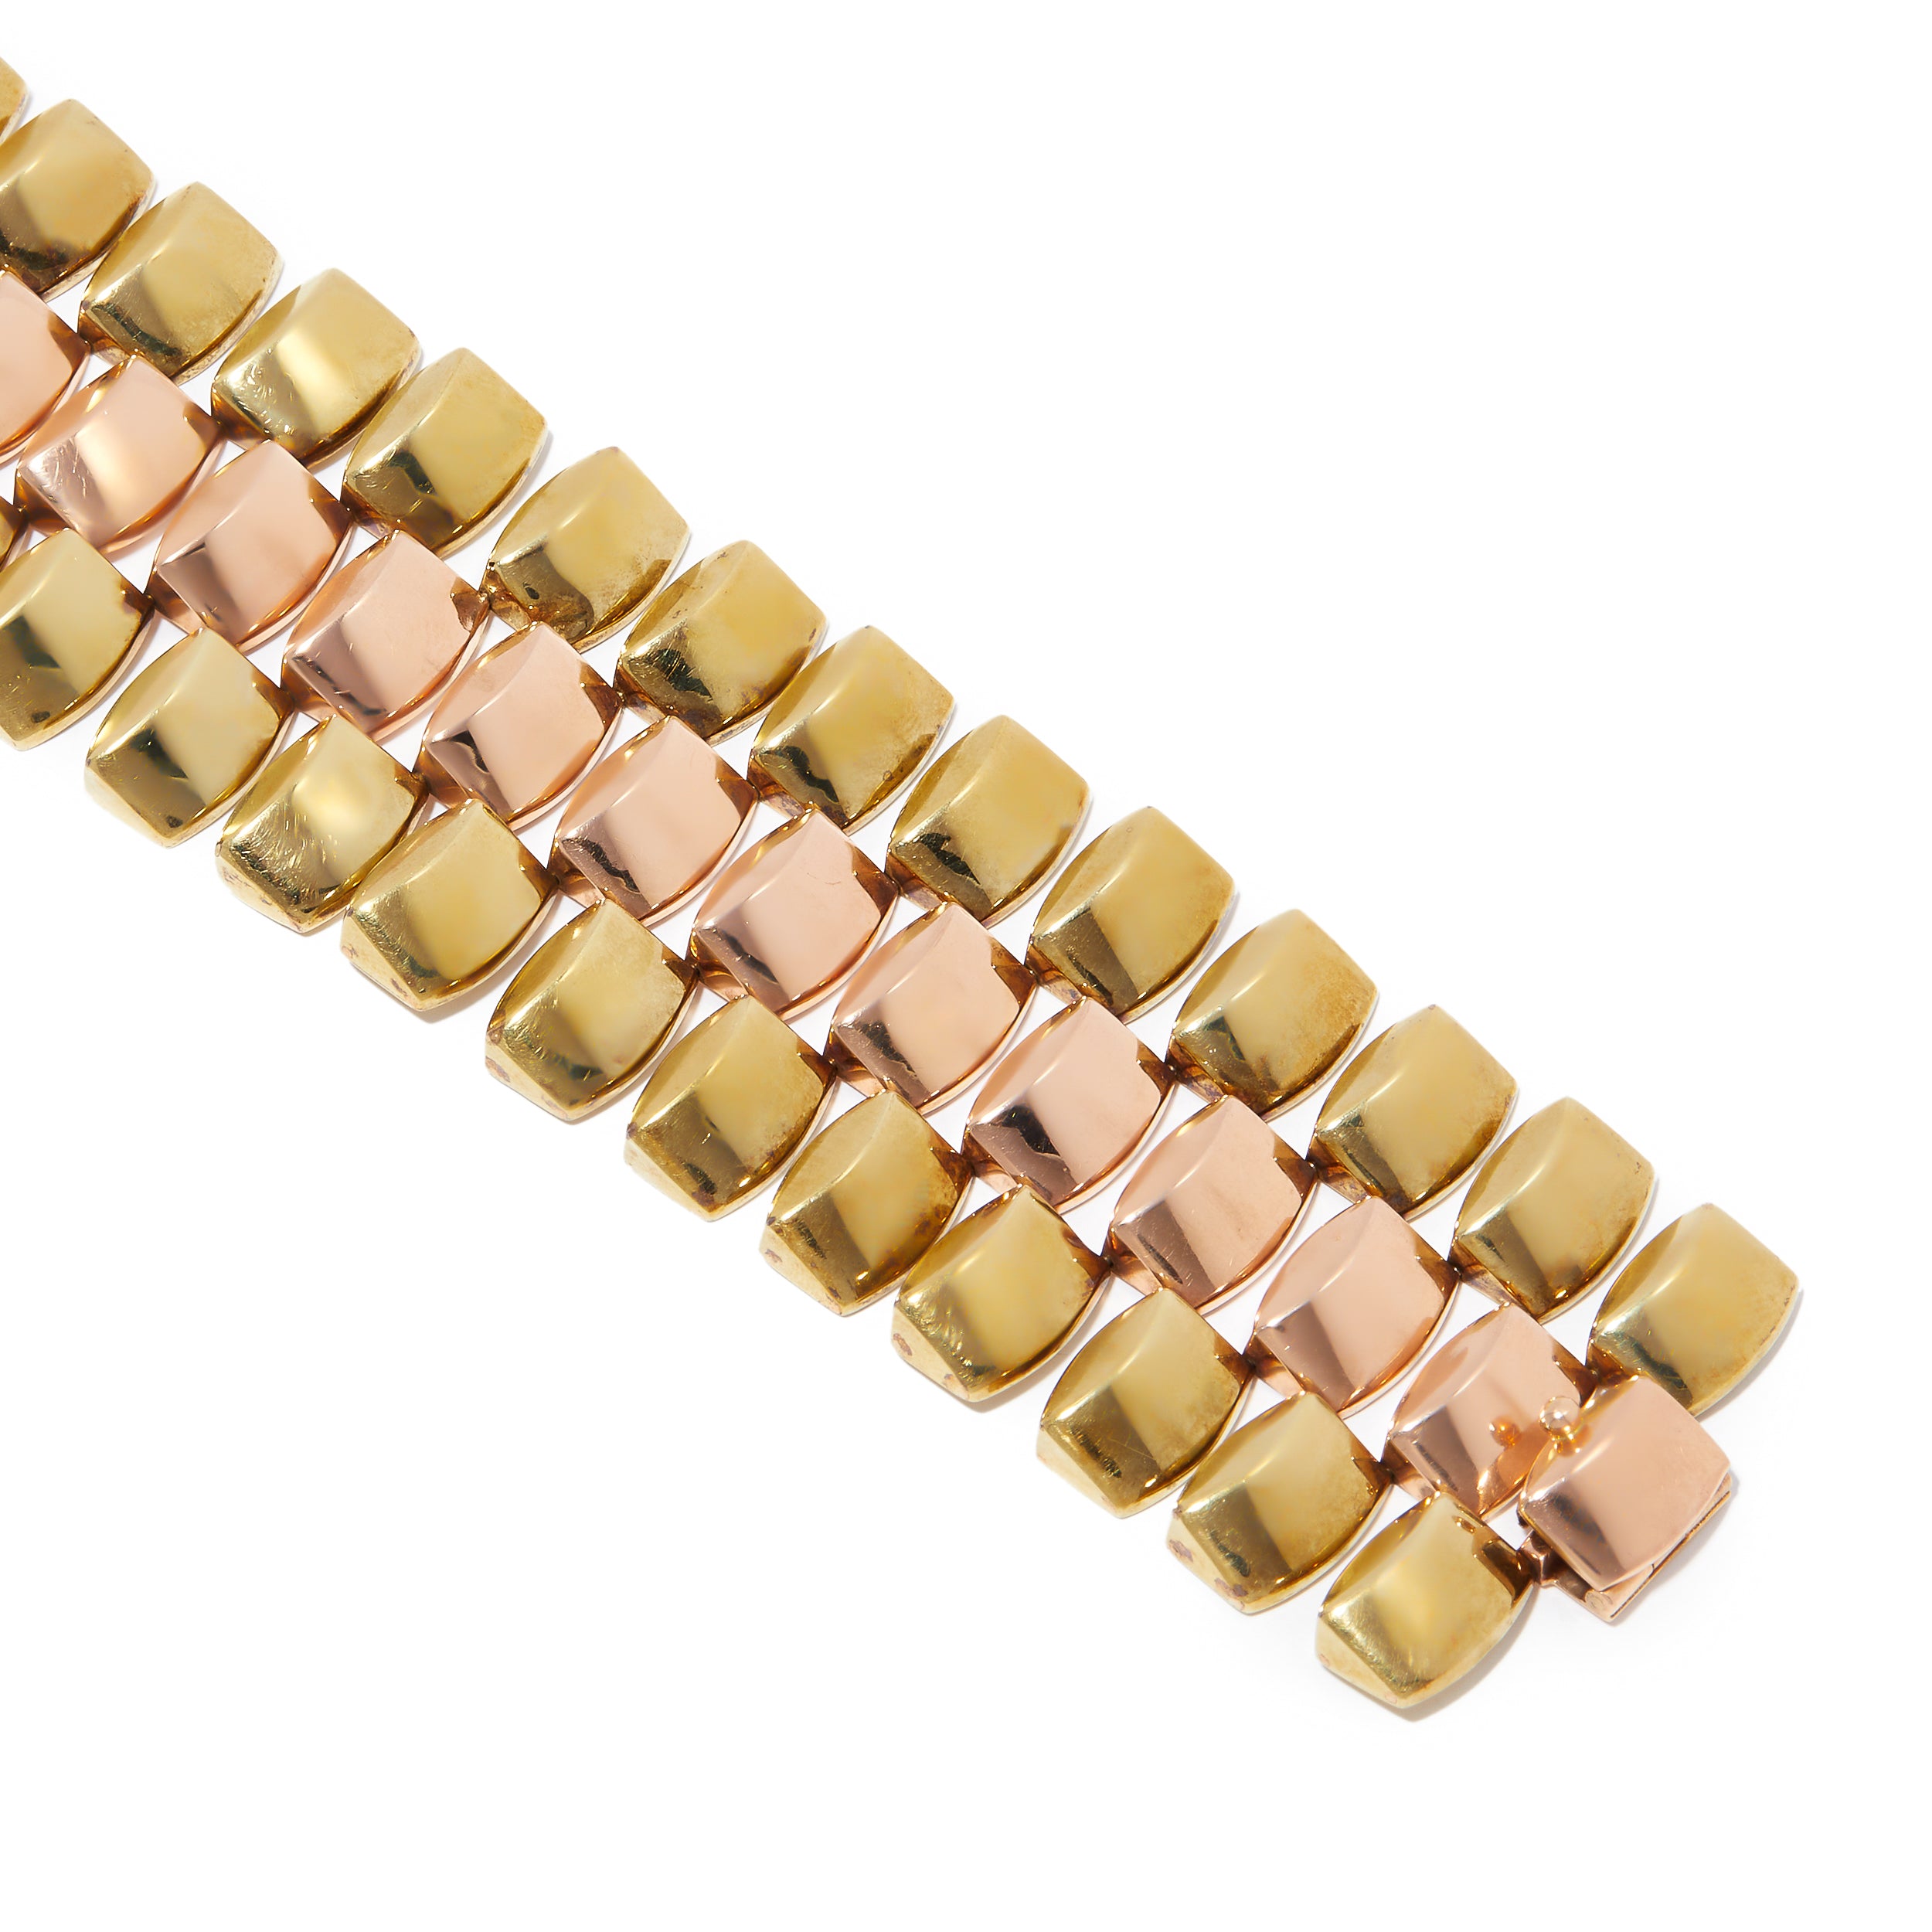 Retro two-tone 14ct gold link bracelet stretched.